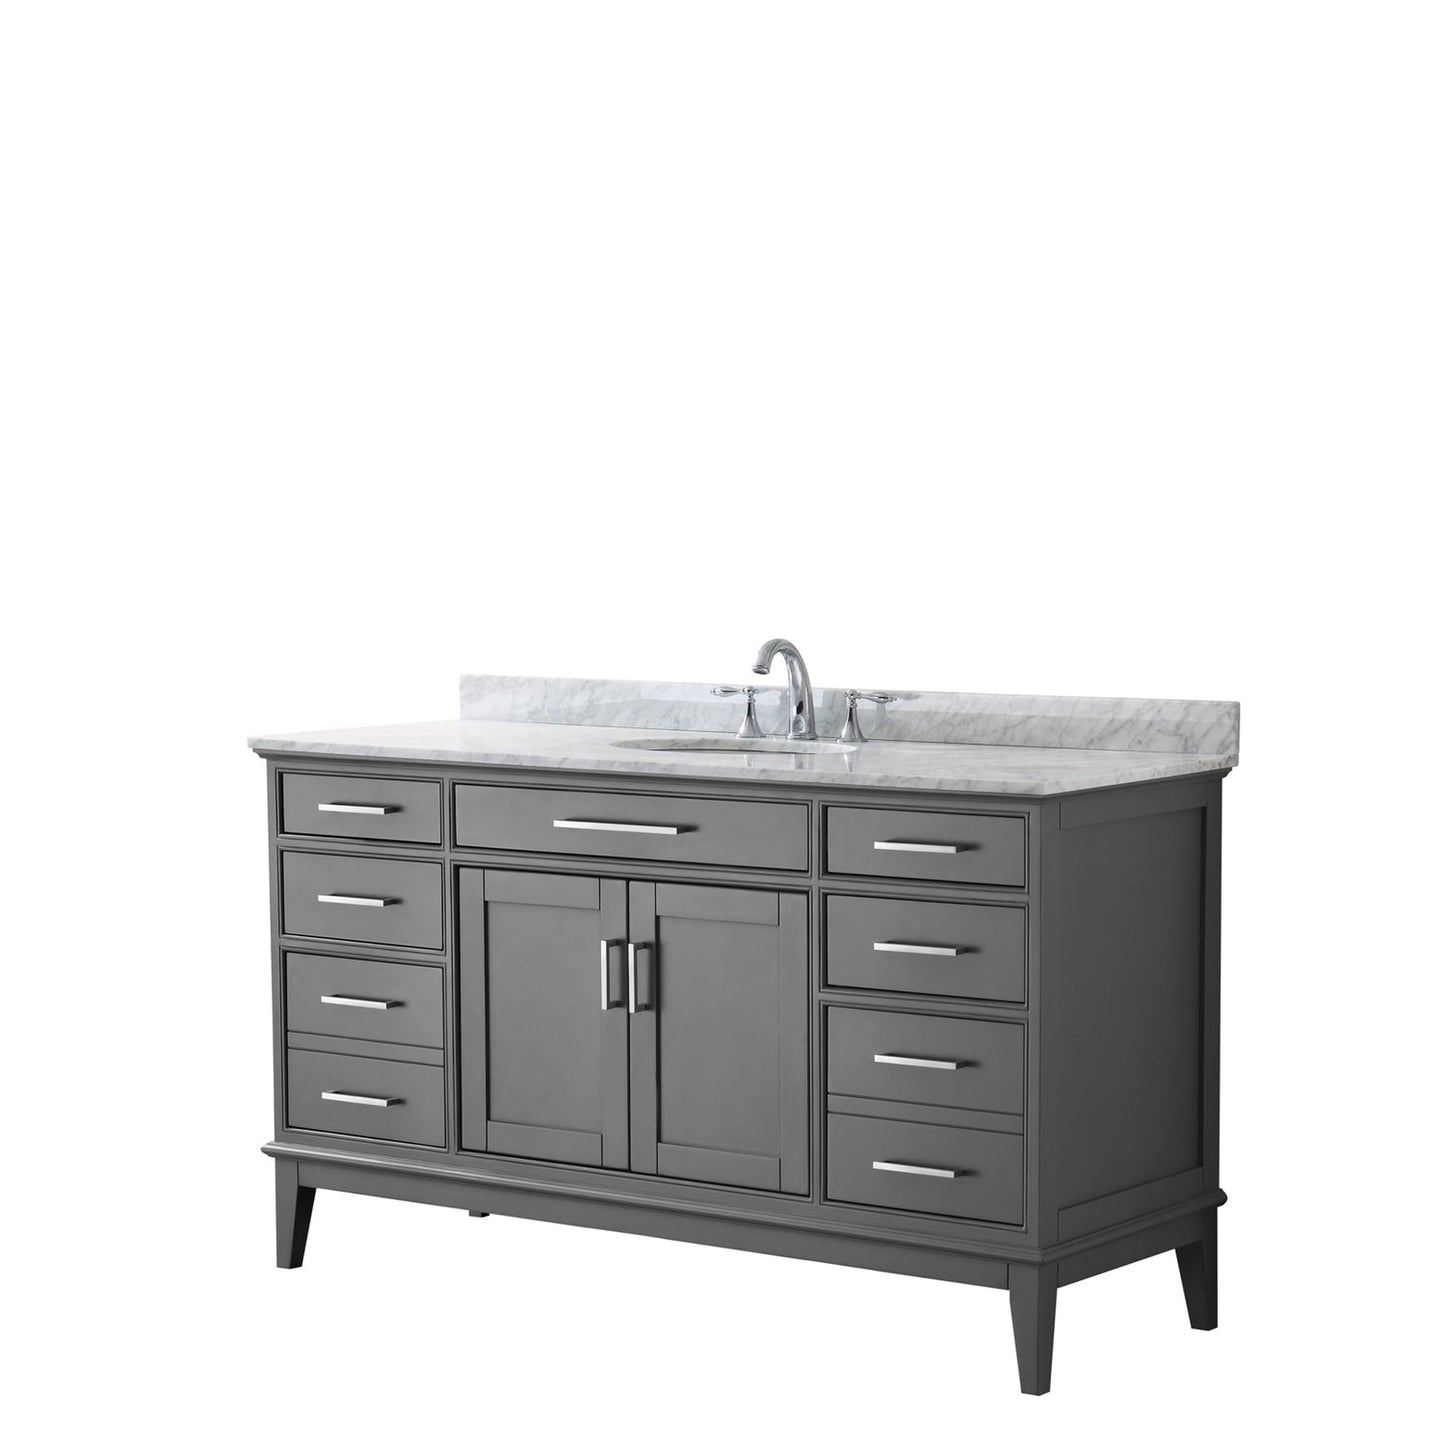 Wyndham Collection Margate 60" Single Bathroom Dark Gray Vanity With White Carrara Marble Countertop And Undermount Oval Sink